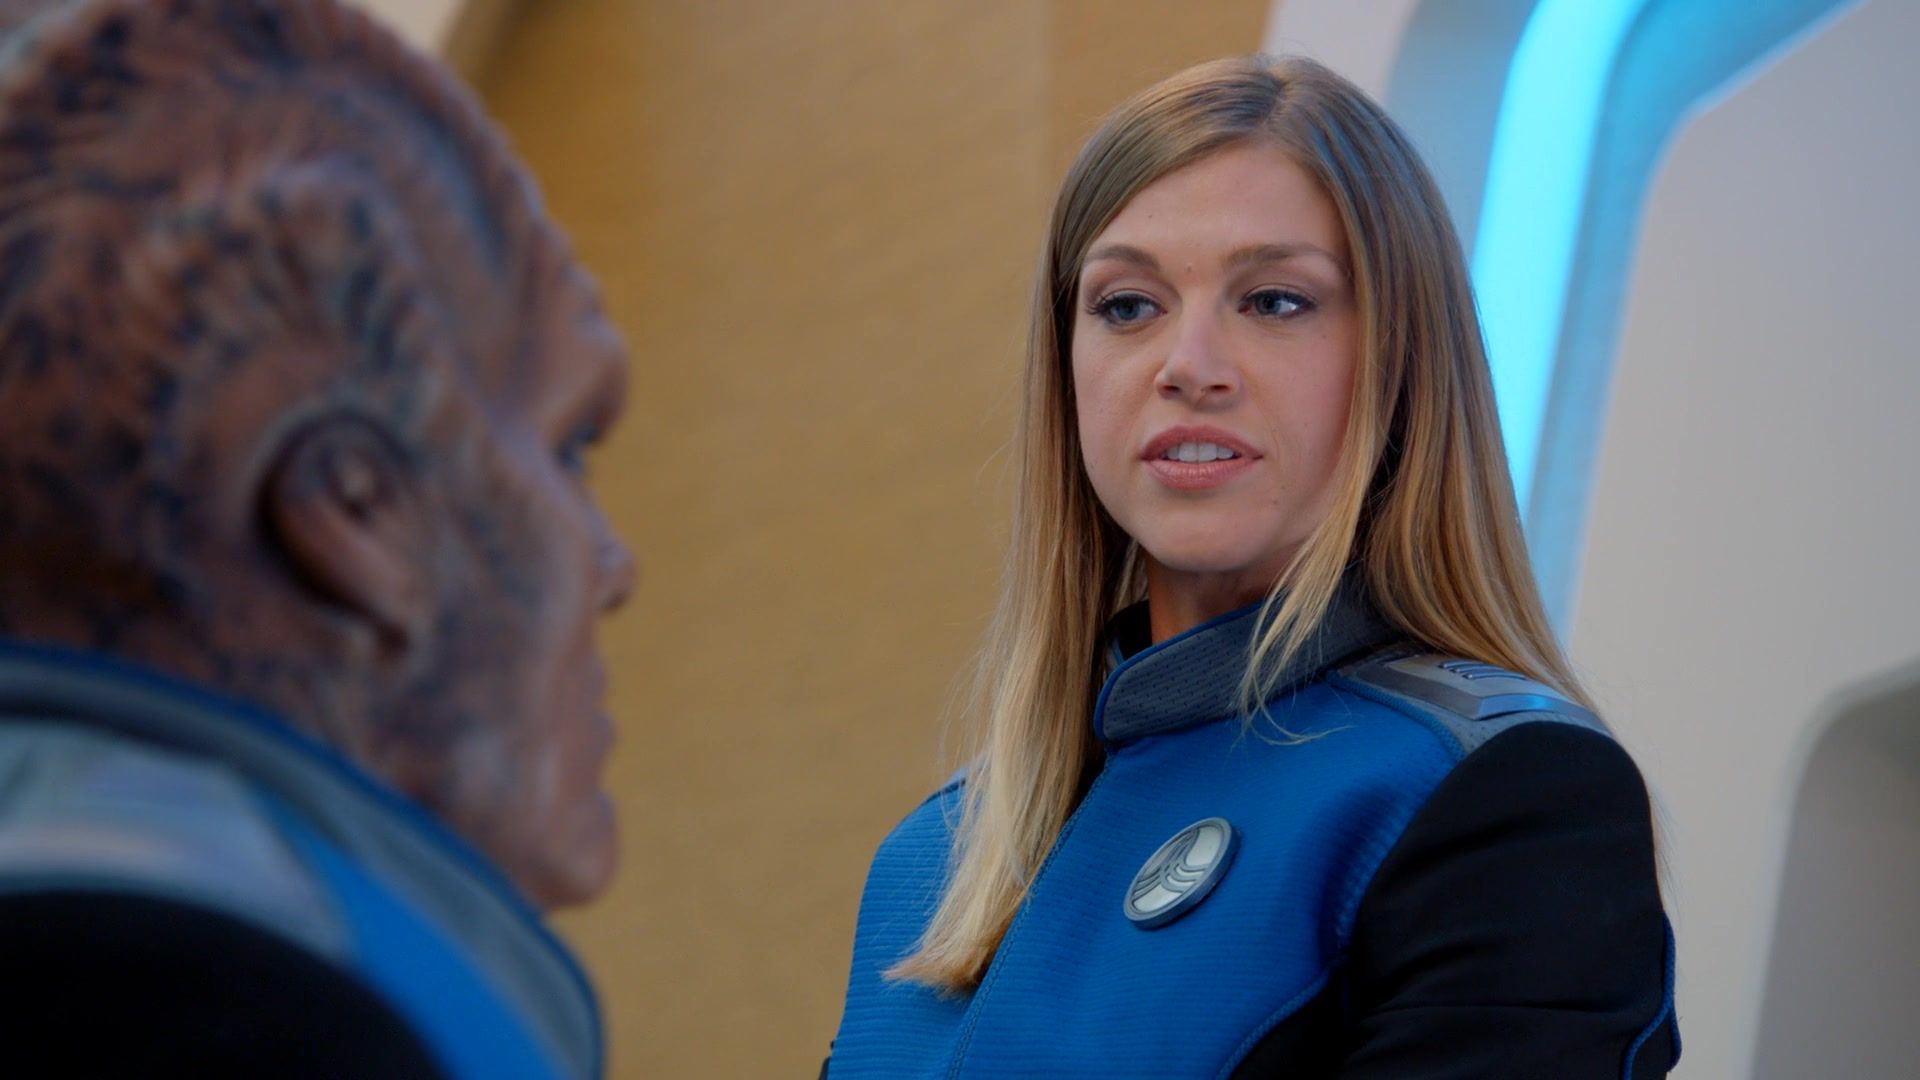 The_Orville_S02E05_All_the_World_is_Birthday_Cake_1080p_AMZN_WEB-DL_DDP5_1_H_264-NTb_0268.jpg